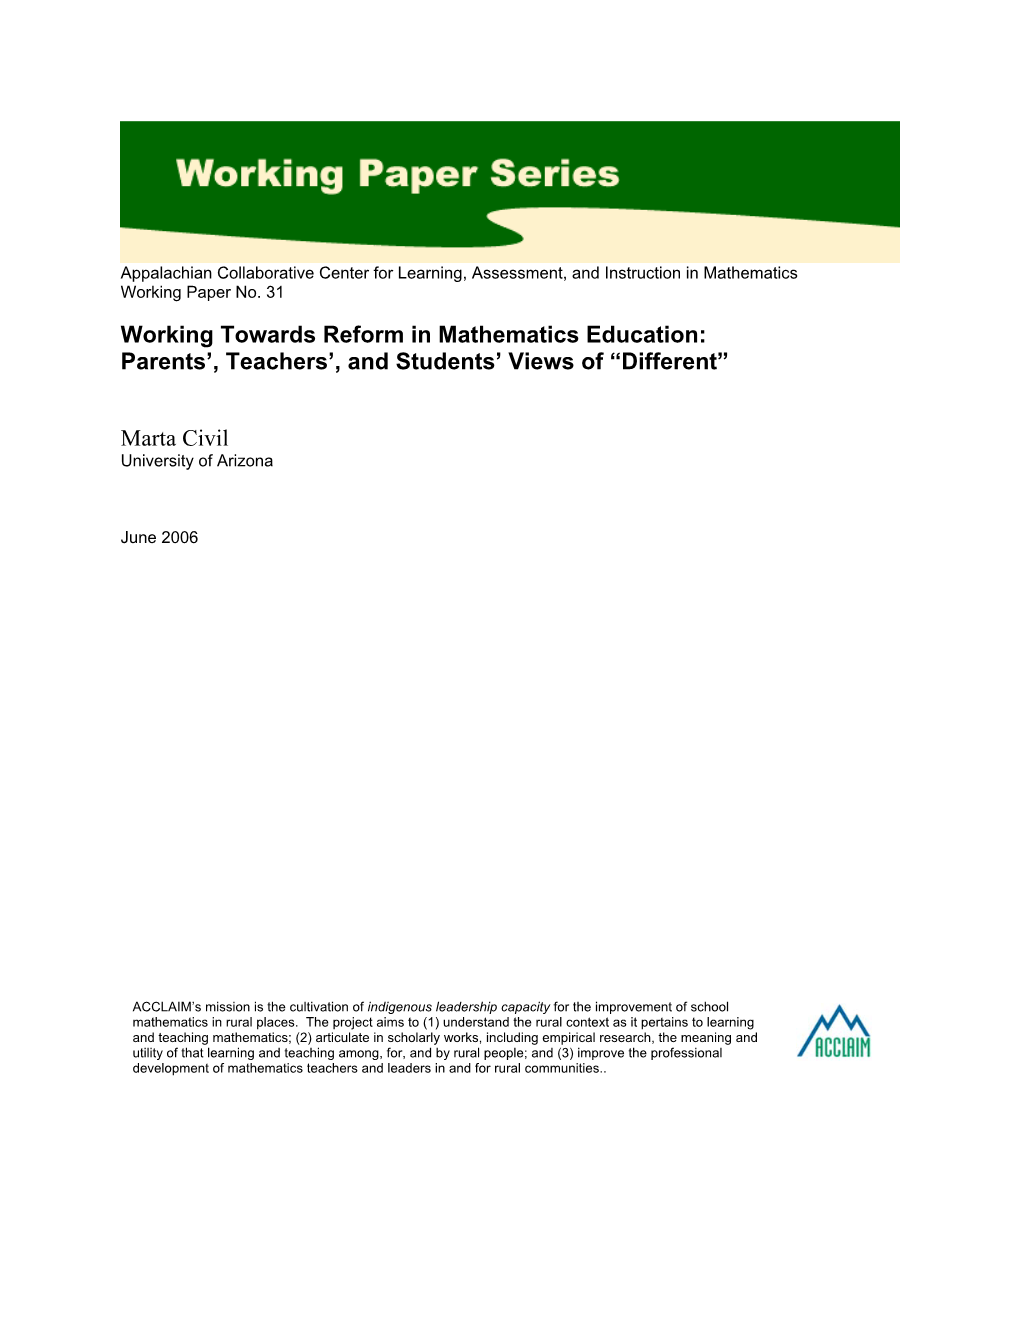 Working Towards Reform in Mathematics Education: Parents', Teachers', and Students' Views of “Different” Marta Civil